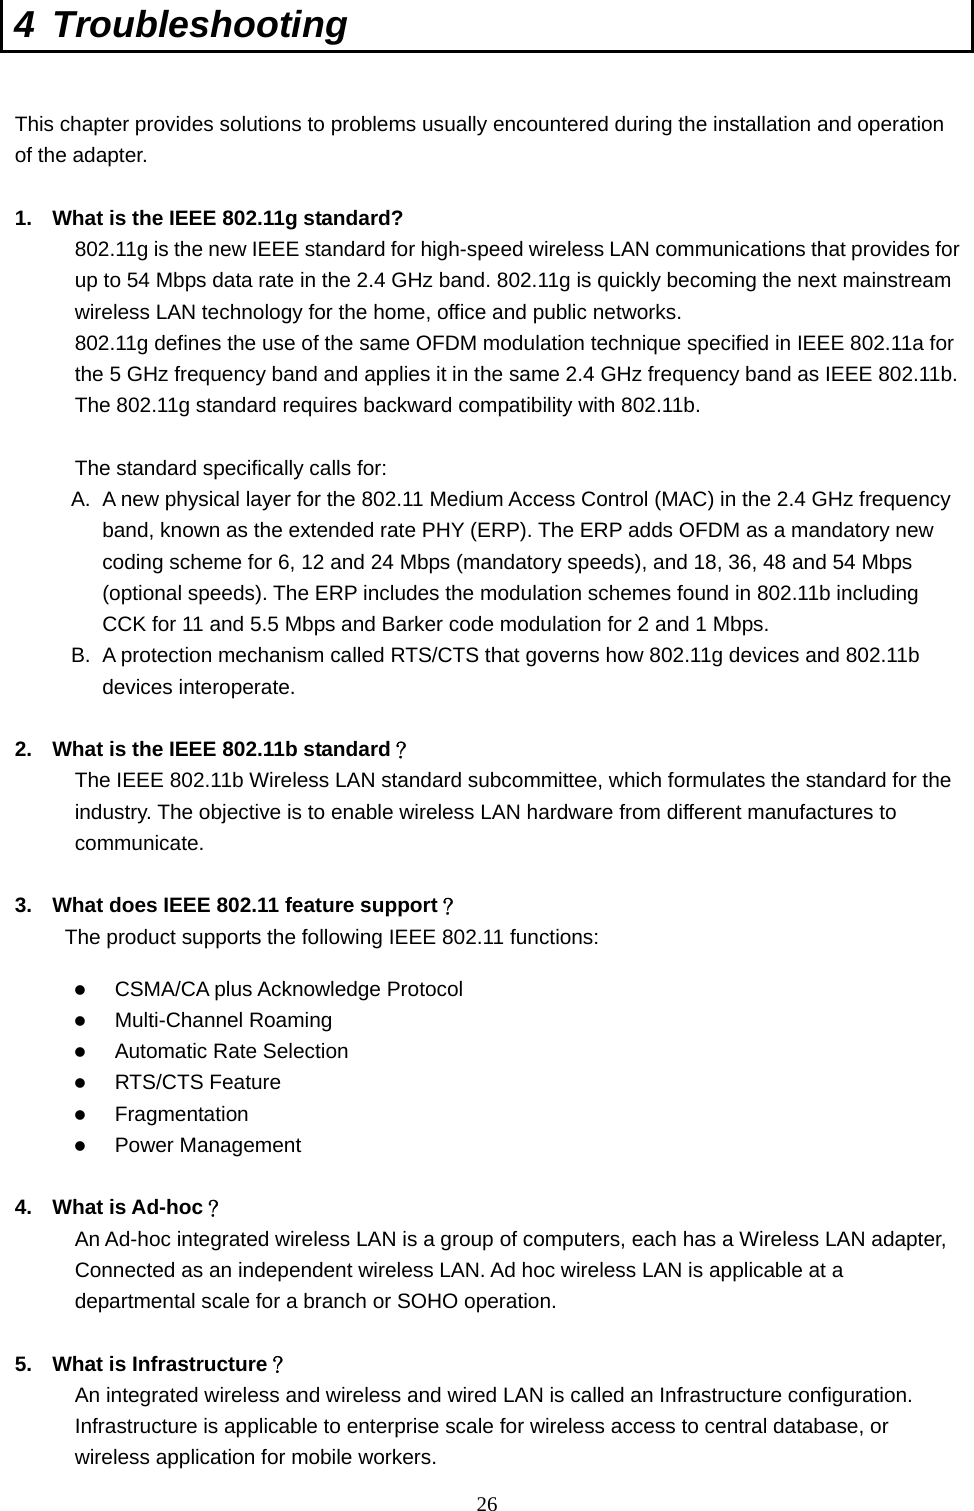  26 4 Troubleshooting  This chapter provides solutions to problems usually encountered during the installation and operation of the adapter.  1.  What is the IEEE 802.11g standard? 802.11g is the new IEEE standard for high-speed wireless LAN communications that provides for up to 54 Mbps data rate in the 2.4 GHz band. 802.11g is quickly becoming the next mainstream wireless LAN technology for the home, office and public networks.   802.11g defines the use of the same OFDM modulation technique specified in IEEE 802.11a for the 5 GHz frequency band and applies it in the same 2.4 GHz frequency band as IEEE 802.11b. The 802.11g standard requires backward compatibility with 802.11b.  The standard specifically calls for:   A.  A new physical layer for the 802.11 Medium Access Control (MAC) in the 2.4 GHz frequency band, known as the extended rate PHY (ERP). The ERP adds OFDM as a mandatory new coding scheme for 6, 12 and 24 Mbps (mandatory speeds), and 18, 36, 48 and 54 Mbps (optional speeds). The ERP includes the modulation schemes found in 802.11b including CCK for 11 and 5.5 Mbps and Barker code modulation for 2 and 1 Mbps. B.  A protection mechanism called RTS/CTS that governs how 802.11g devices and 802.11b devices interoperate.  2.  What is the IEEE 802.11b standard？ The IEEE 802.11b Wireless LAN standard subcommittee, which formulates the standard for the industry. The objective is to enable wireless LAN hardware from different manufactures to communicate.  3.  What does IEEE 802.11 feature support？ The product supports the following IEEE 802.11 functions: z CSMA/CA plus Acknowledge Protocol z Multi-Channel Roaming z Automatic Rate Selection z RTS/CTS Feature z Fragmentation z Power Management  4. What is Ad-hoc？ An Ad-hoc integrated wireless LAN is a group of computers, each has a Wireless LAN adapter, Connected as an independent wireless LAN. Ad hoc wireless LAN is applicable at a departmental scale for a branch or SOHO operation.  5.  What is Infrastructure？ An integrated wireless and wireless and wired LAN is called an Infrastructure configuration. Infrastructure is applicable to enterprise scale for wireless access to central database, or wireless application for mobile workers. 